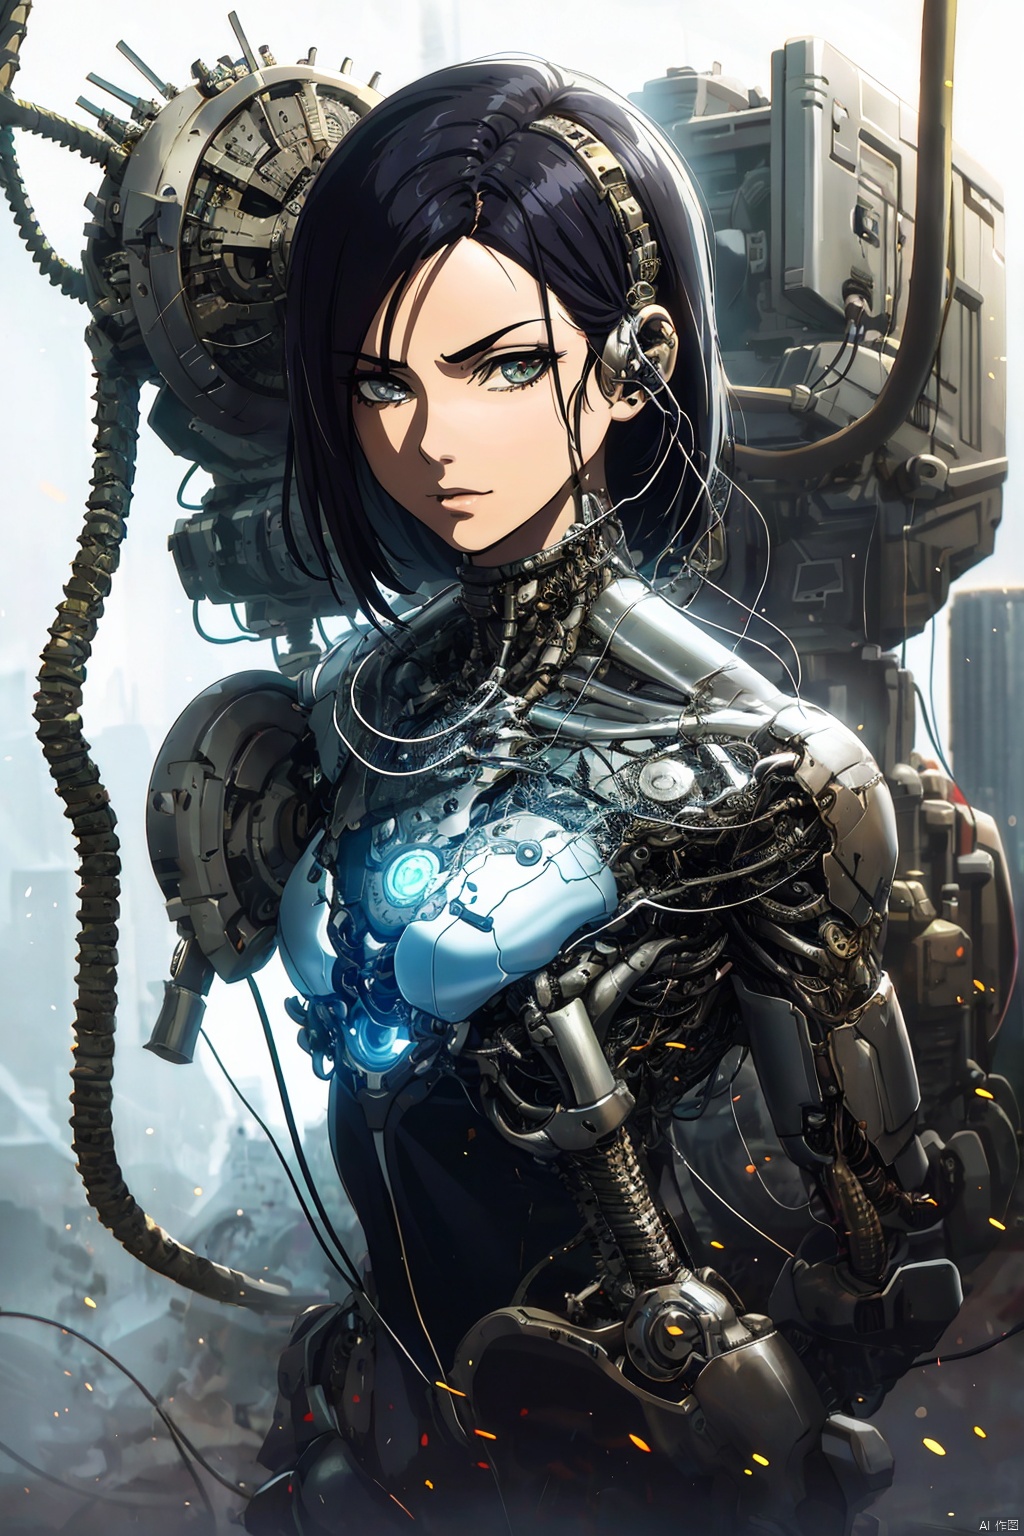  masterpiece,best quality,1mechanical girl,detailed face,shadows,8k,ultra sharp,metal,intricate,ornaments detailed,cold colors,egypician detail,highly intricate details,rending on cgsociety,facing camera,machanical limbs,mechanical cervial attaching to neck,wires and cables connecting to head,killing machine,ghost in the shell,((anime art style)),